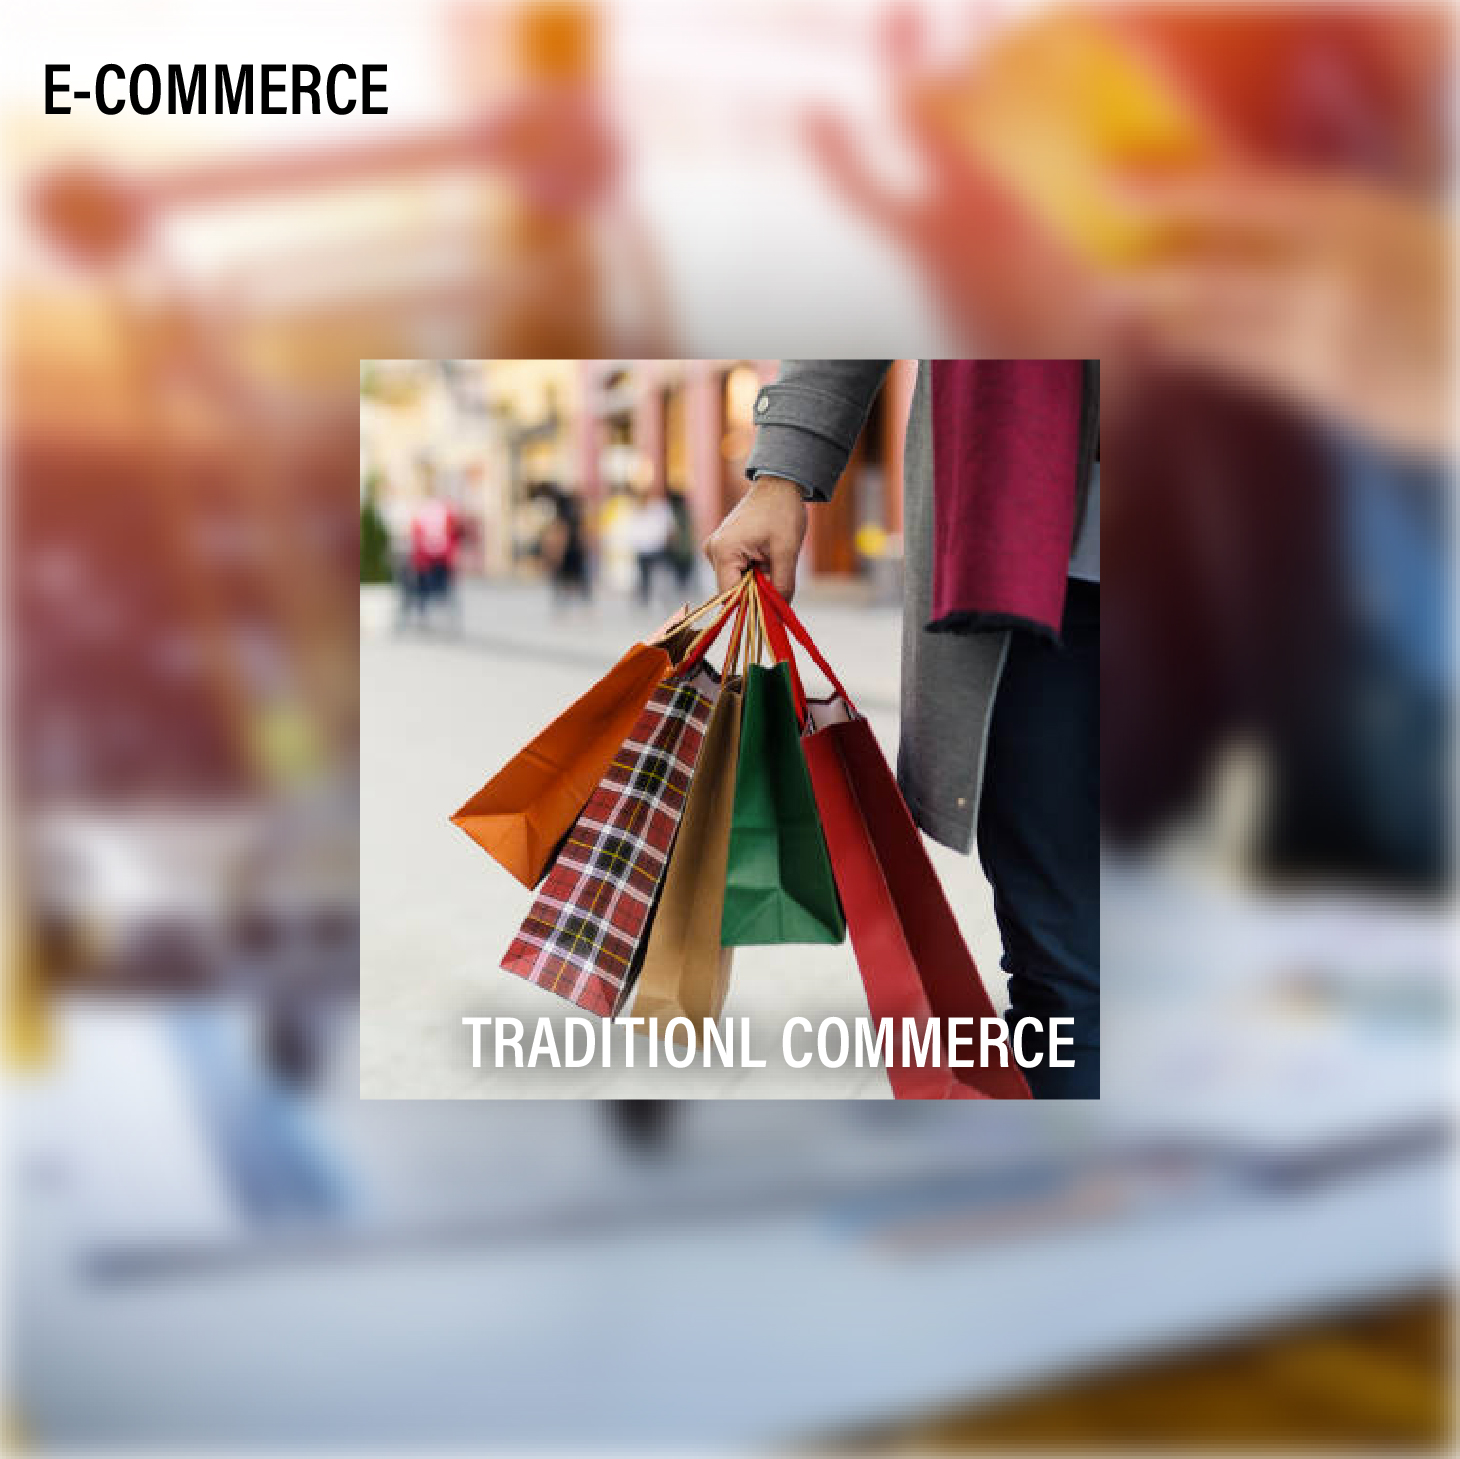 eCommerce Different from Traditional Commerce